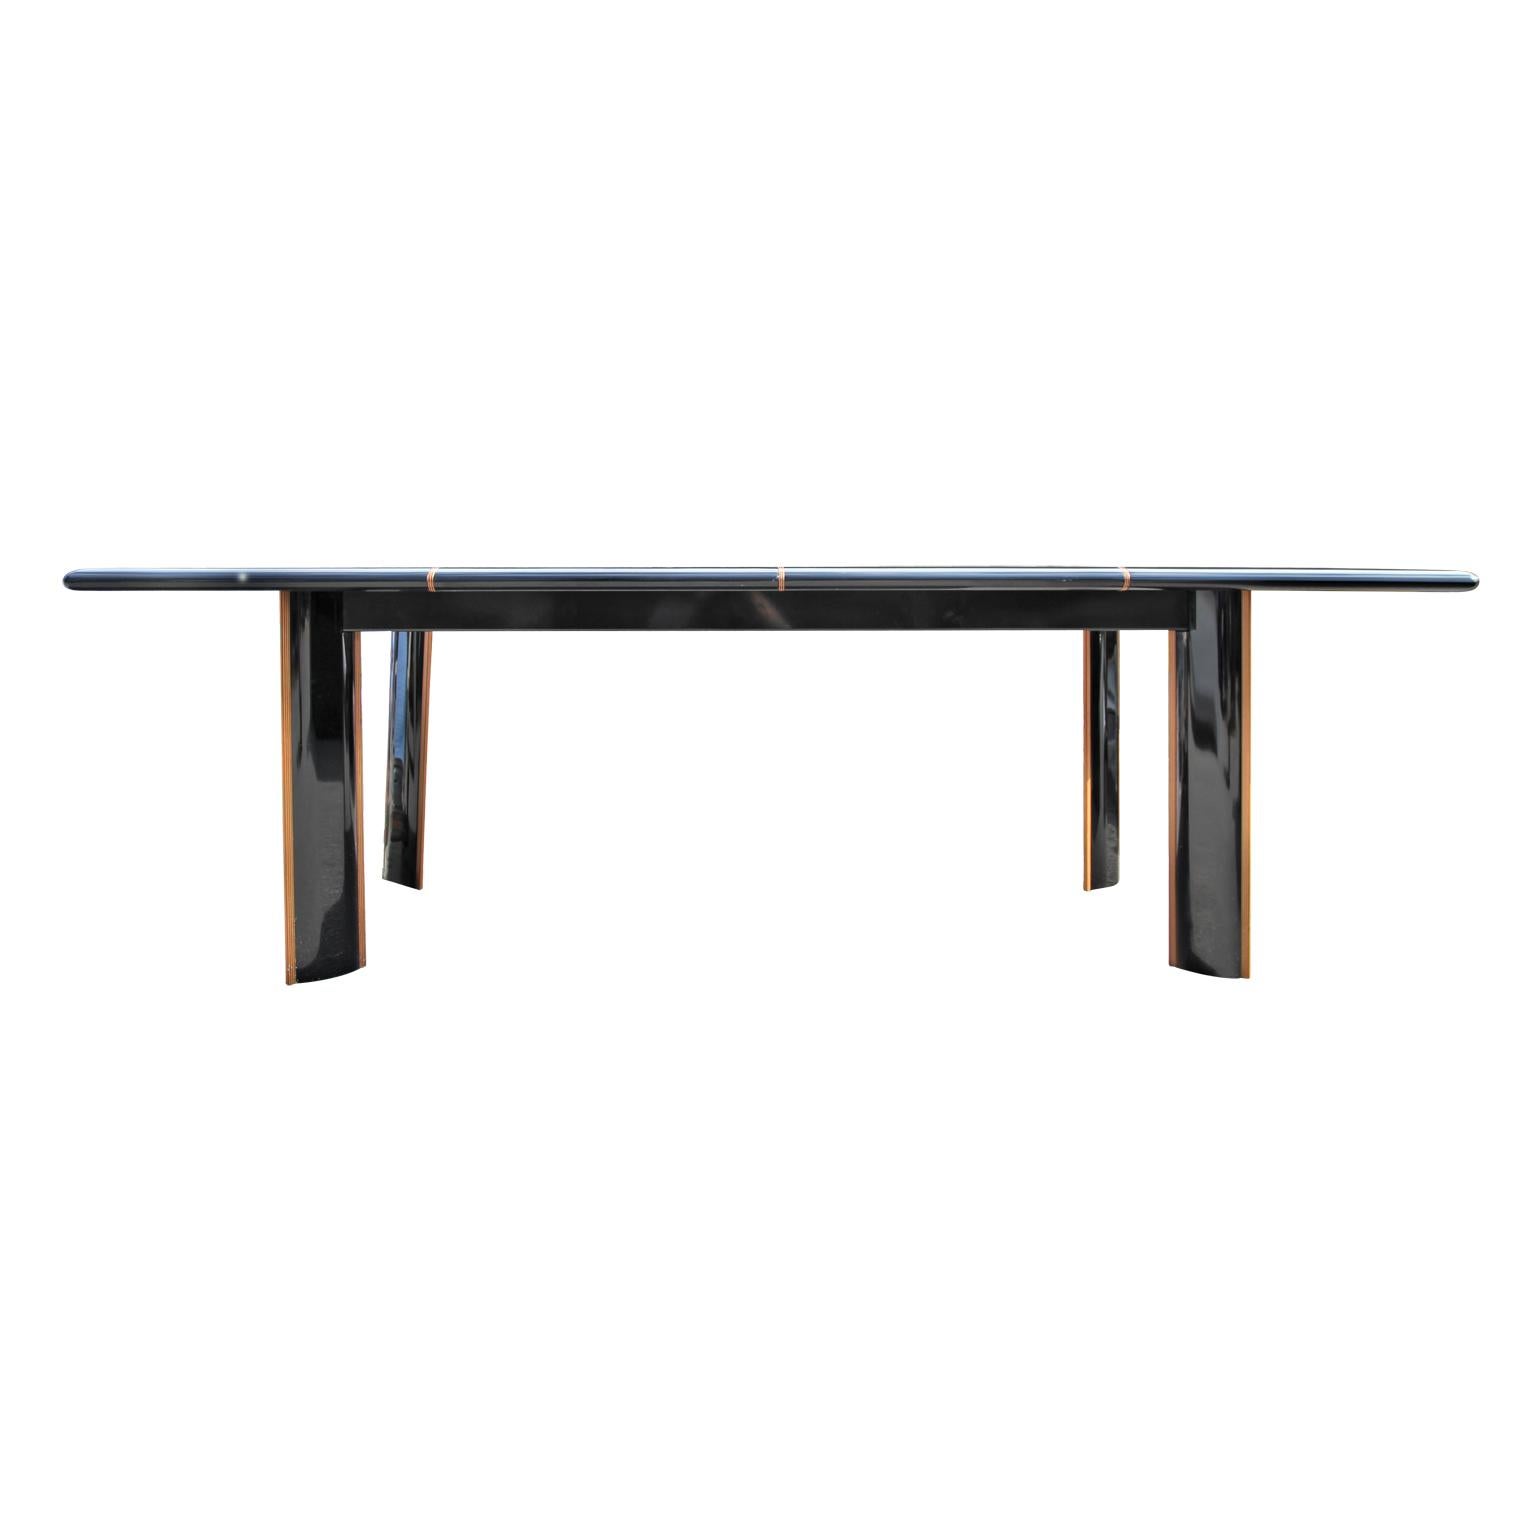 Post-Modern Roche Bobois for Pierre Cardin Italian High Gloss Black Lacquer Dining Table